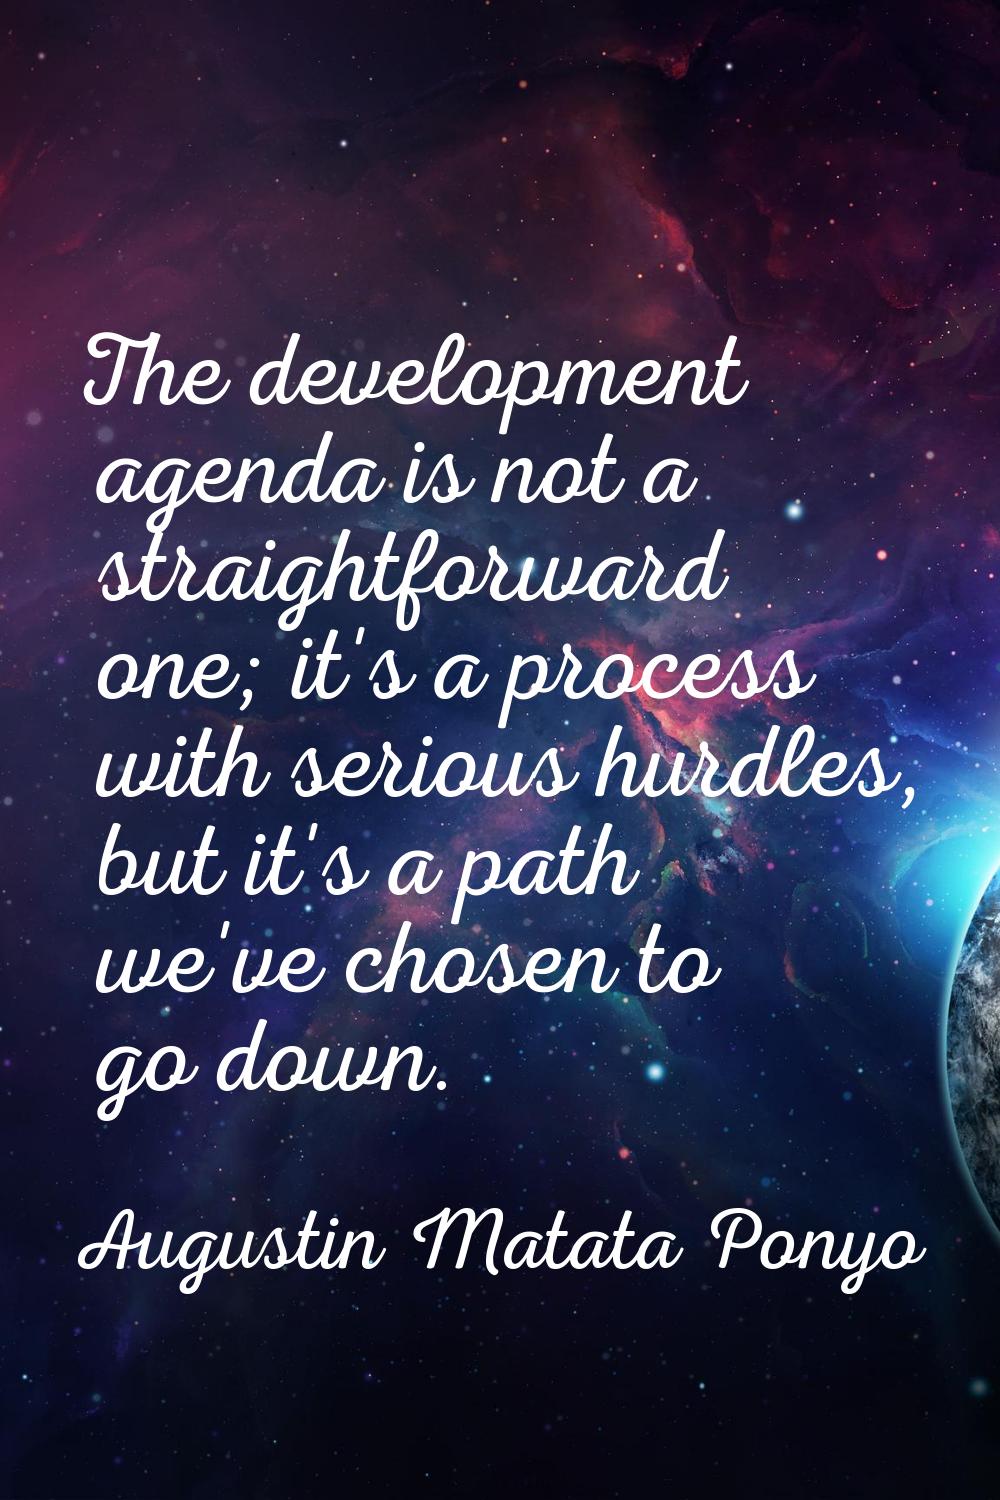 The development agenda is not a straightforward one; it's a process with serious hurdles, but it's 